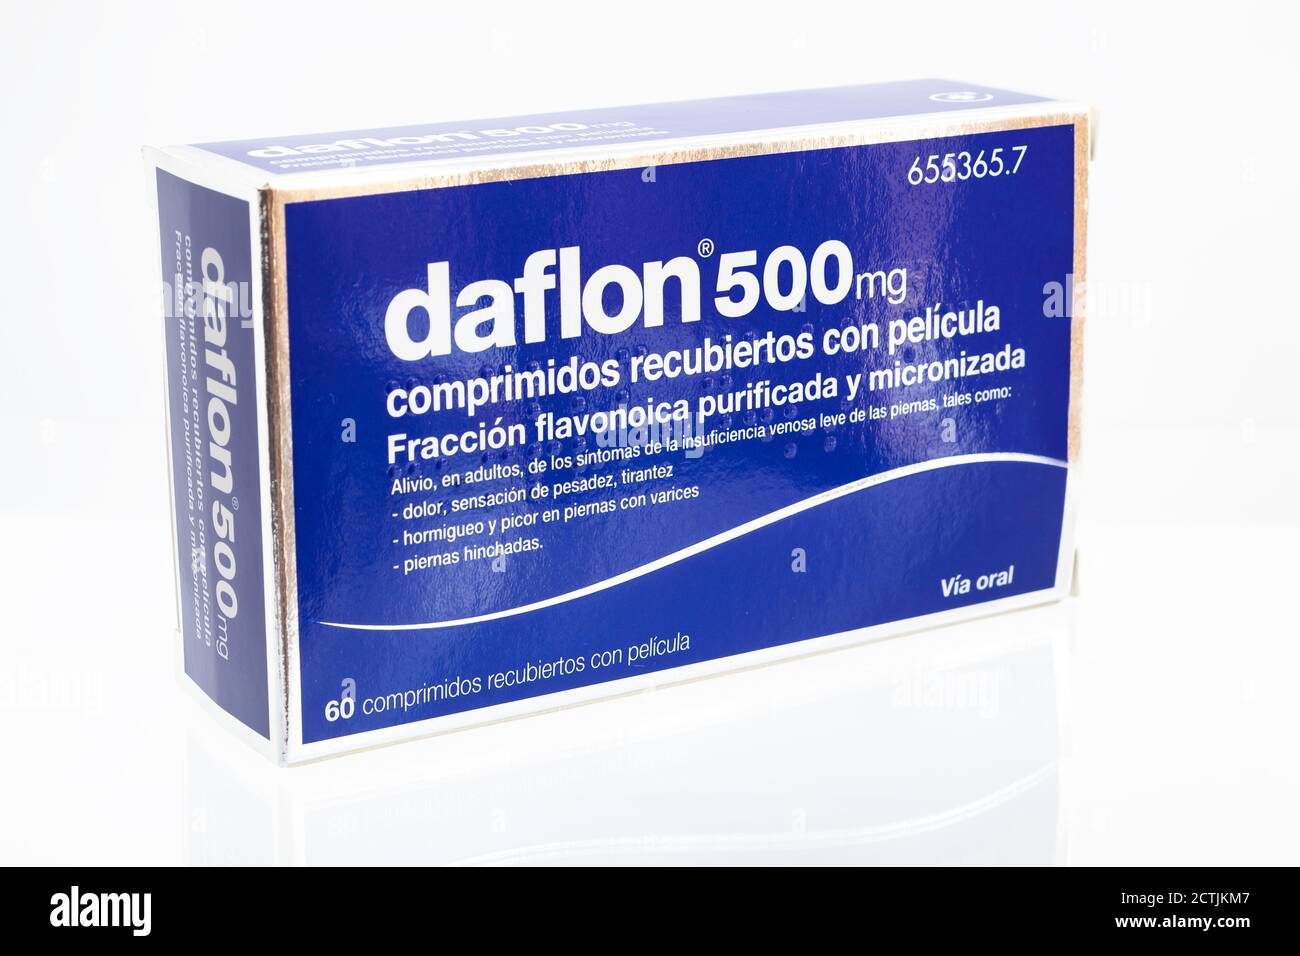 Huelva, Spain-September 23,2020: Spanish Box of Daflon coated tablets, a micronized purified flavonoid fraction containing diosmin and other flavonoid Stock Photo